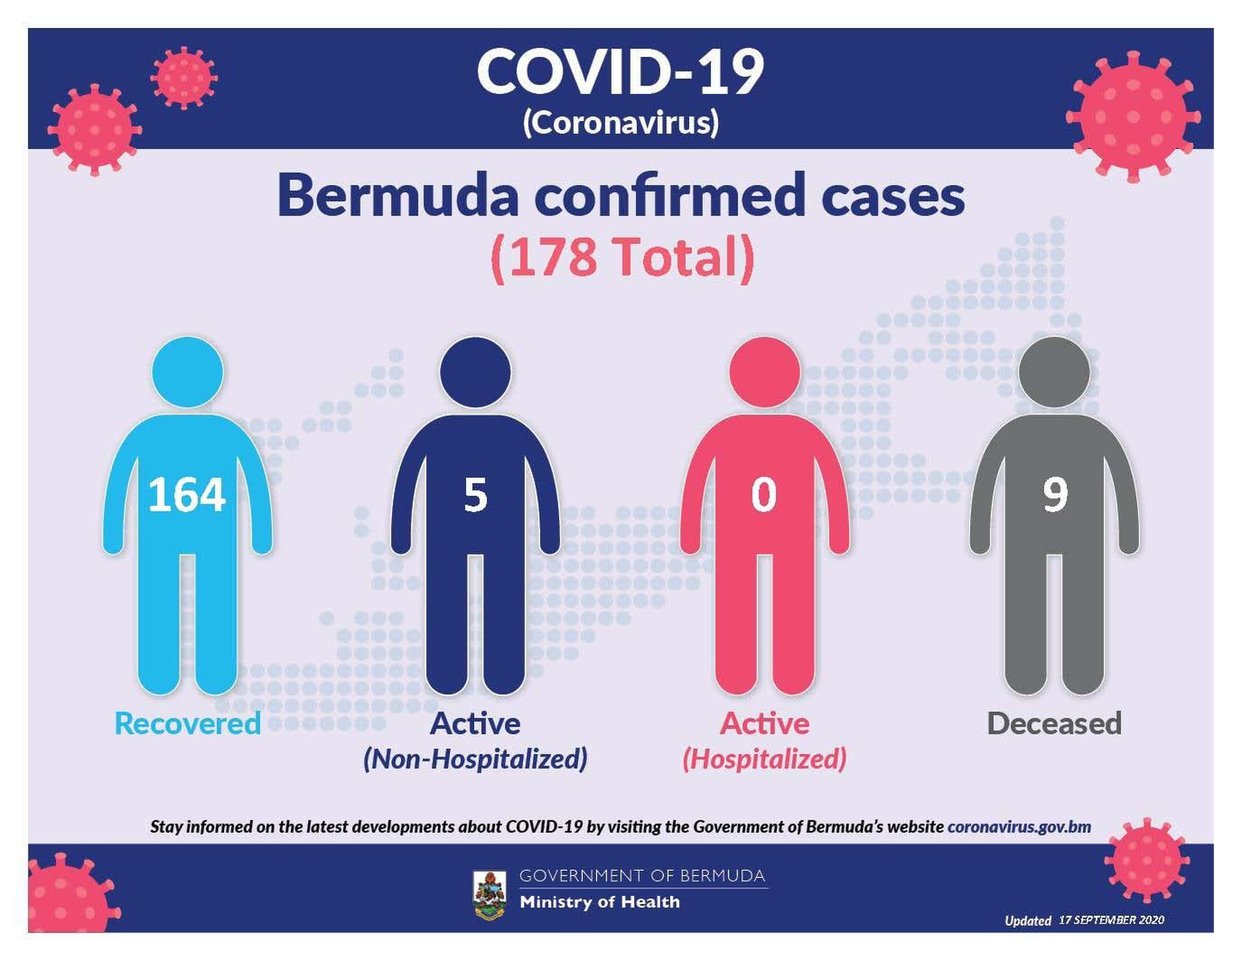 No new COVID-19 cases reported in Bermuda, 17 September